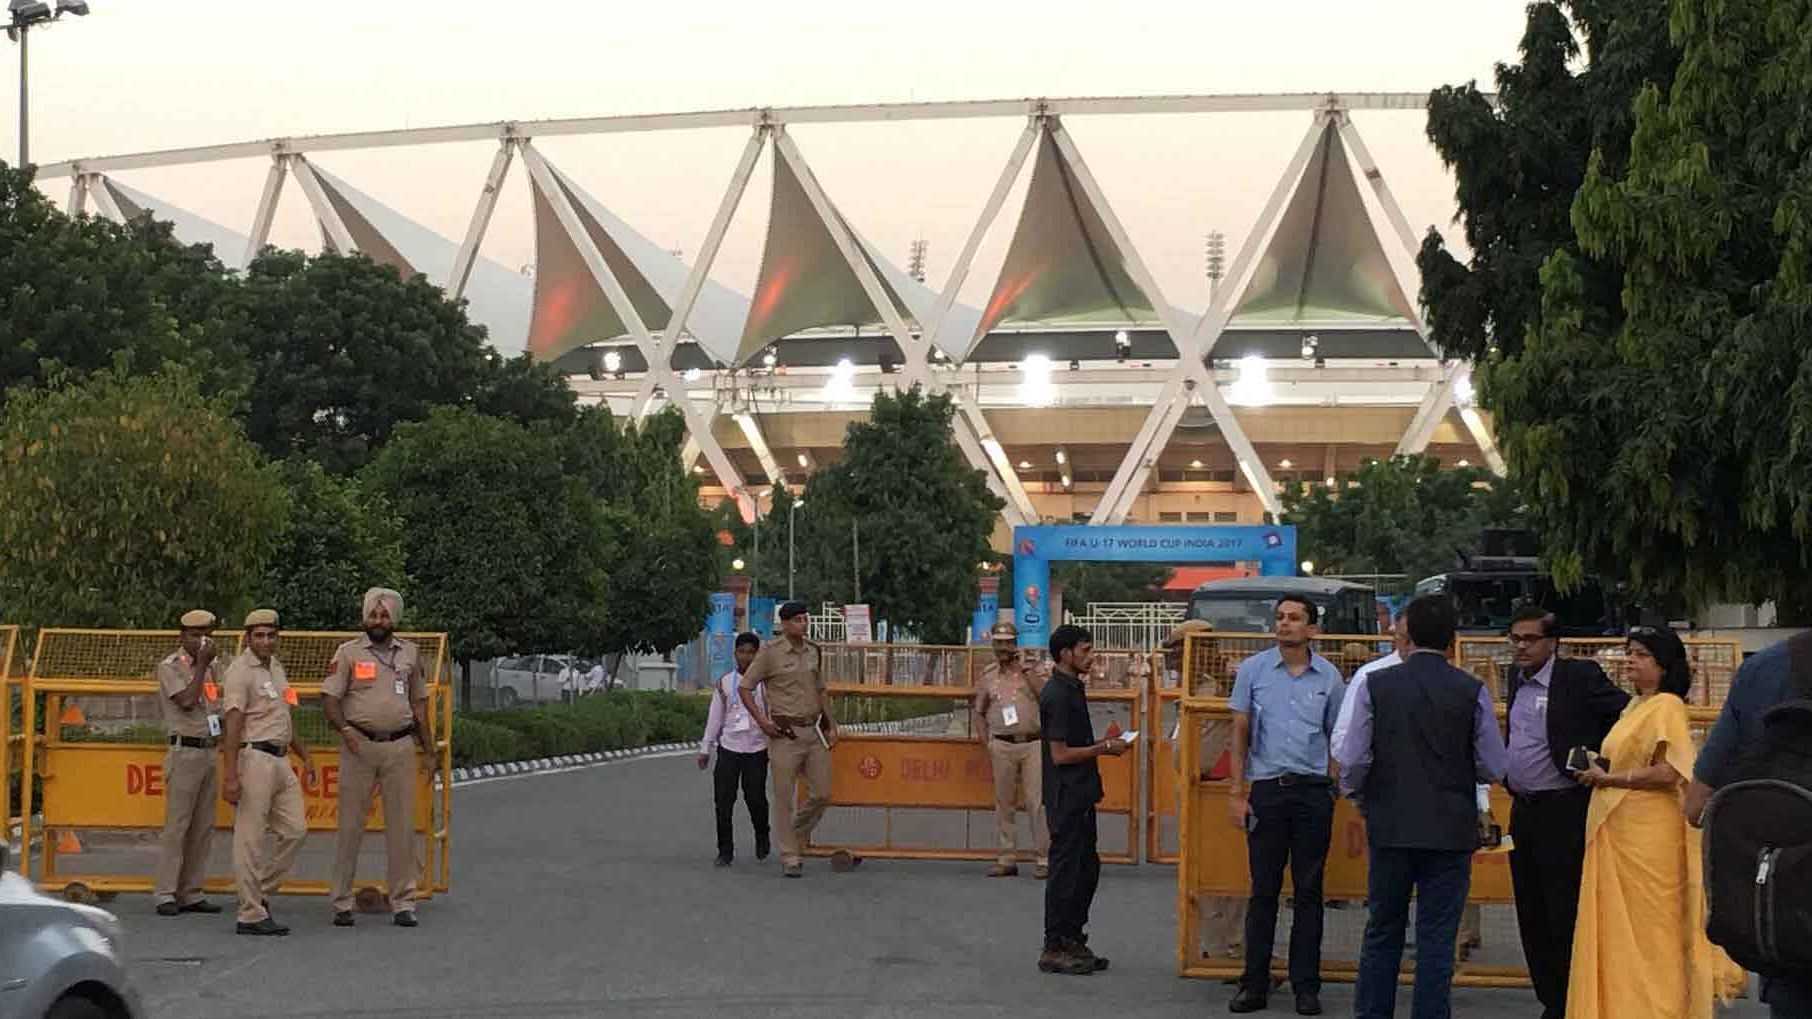 50 percent of sports facilities have been restarted in all stadiums in New Delhi for athletes, the Sports Authority of India (SAI) said on Tuesday.